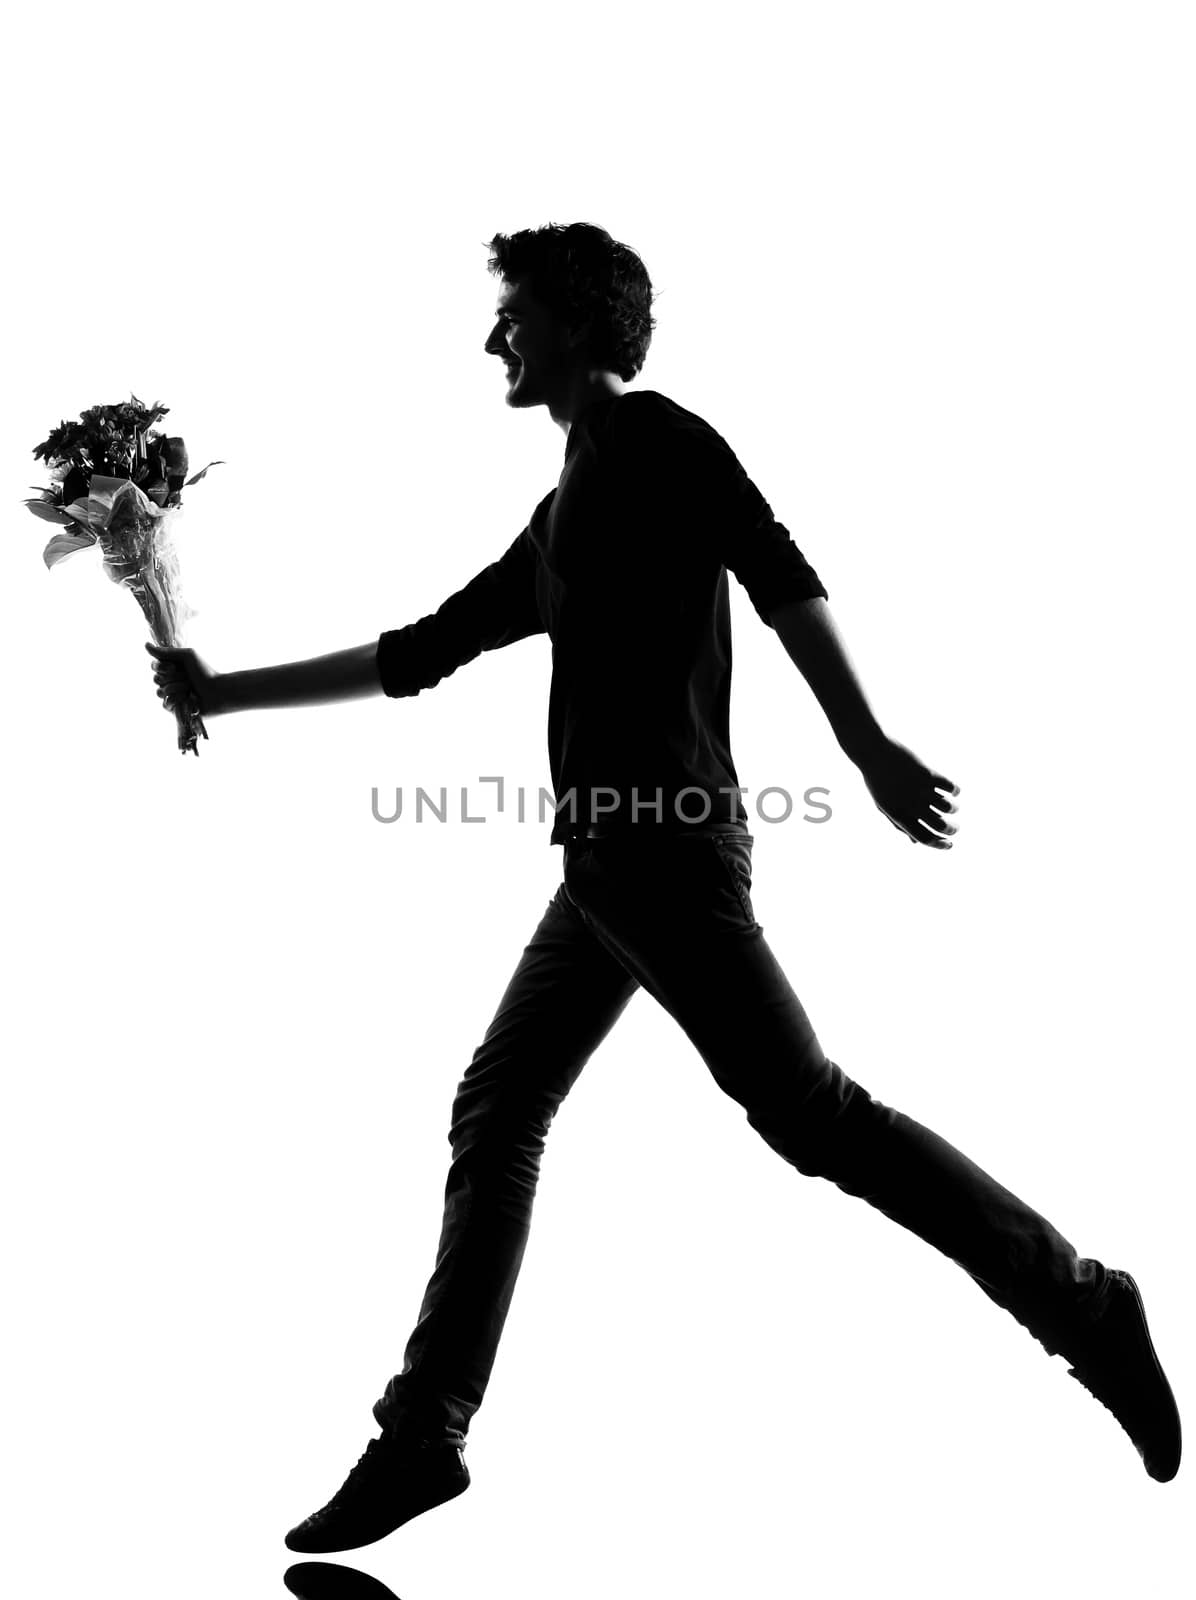 young man offering flowers bouquet silhouette in studio isolated on white background